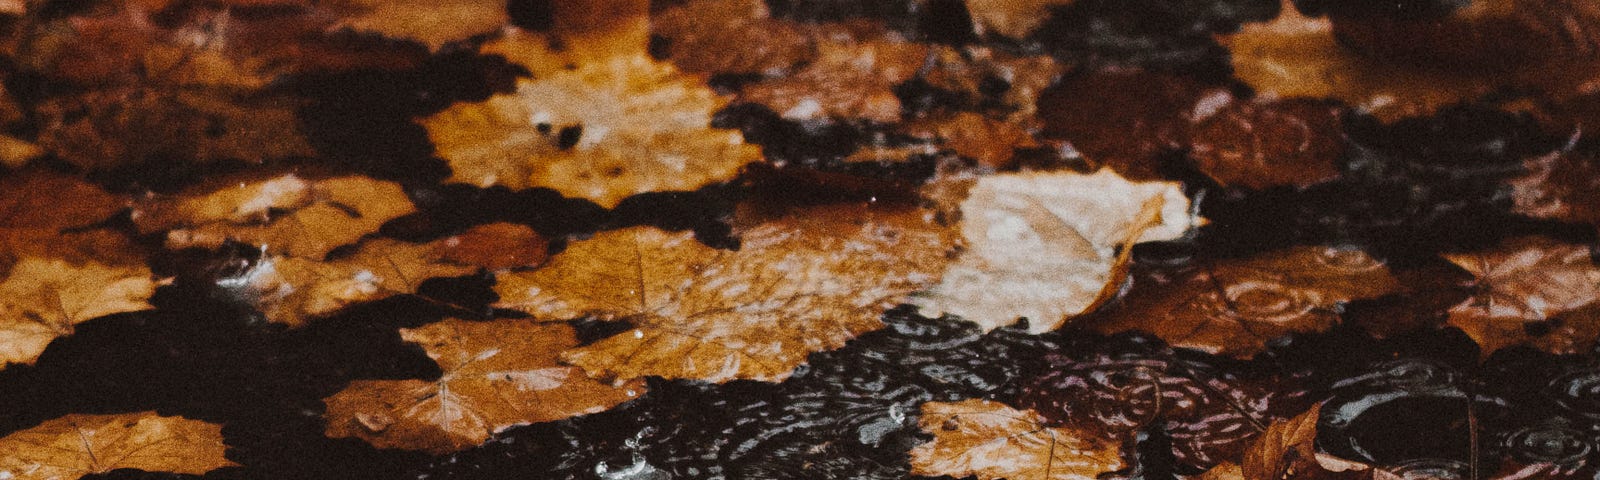 A bunch of brown, dead leaves float on a puddle of rain.